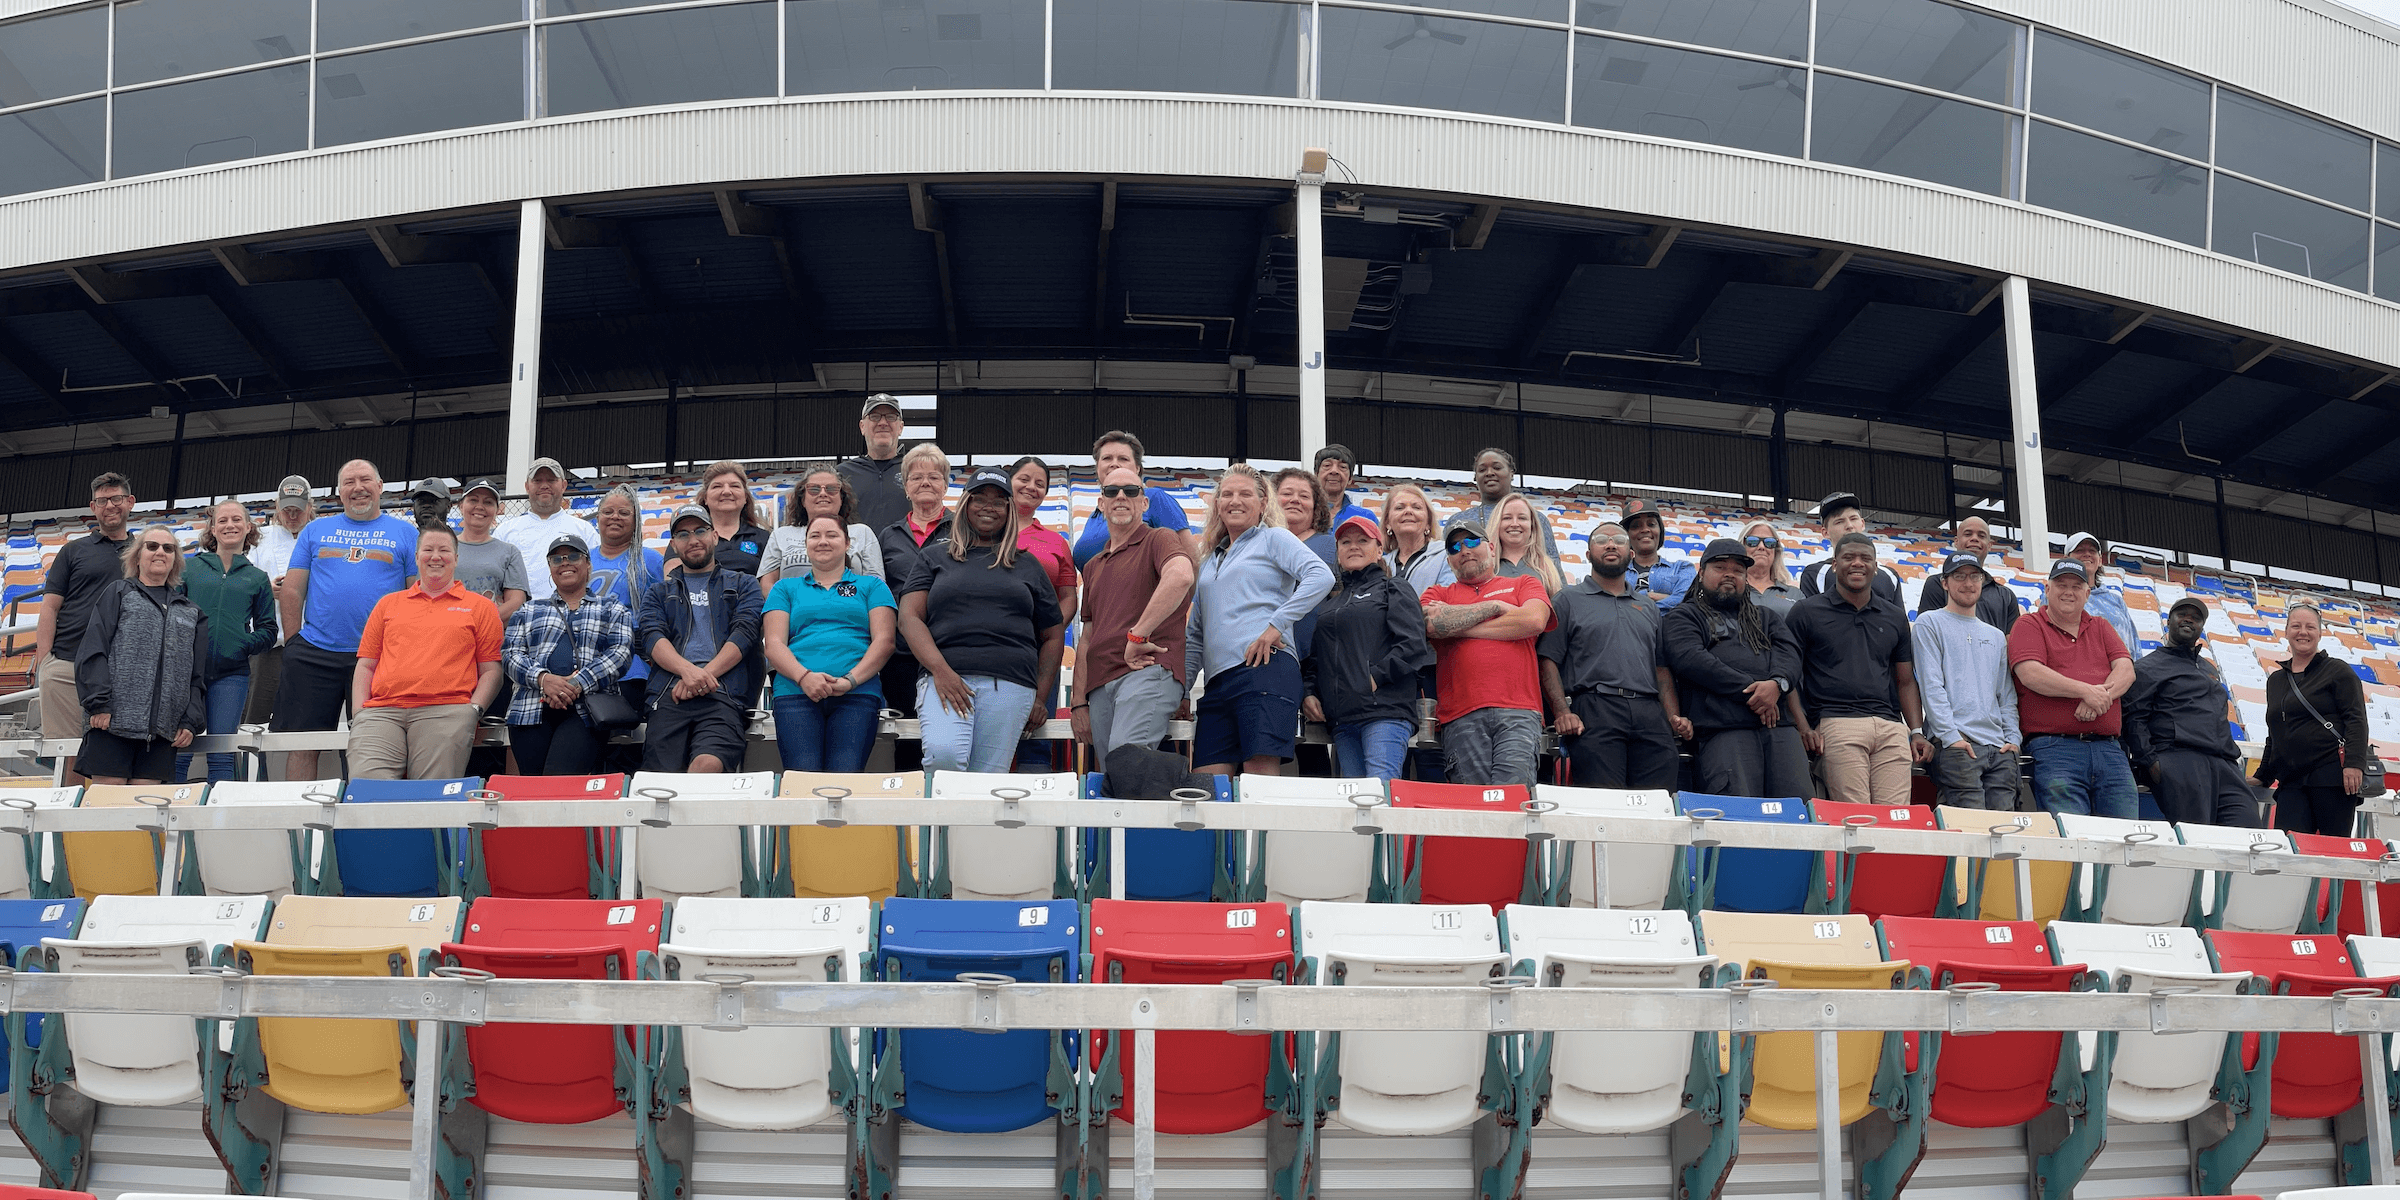 A group of employees in the stands of a stadium - Desktop Version